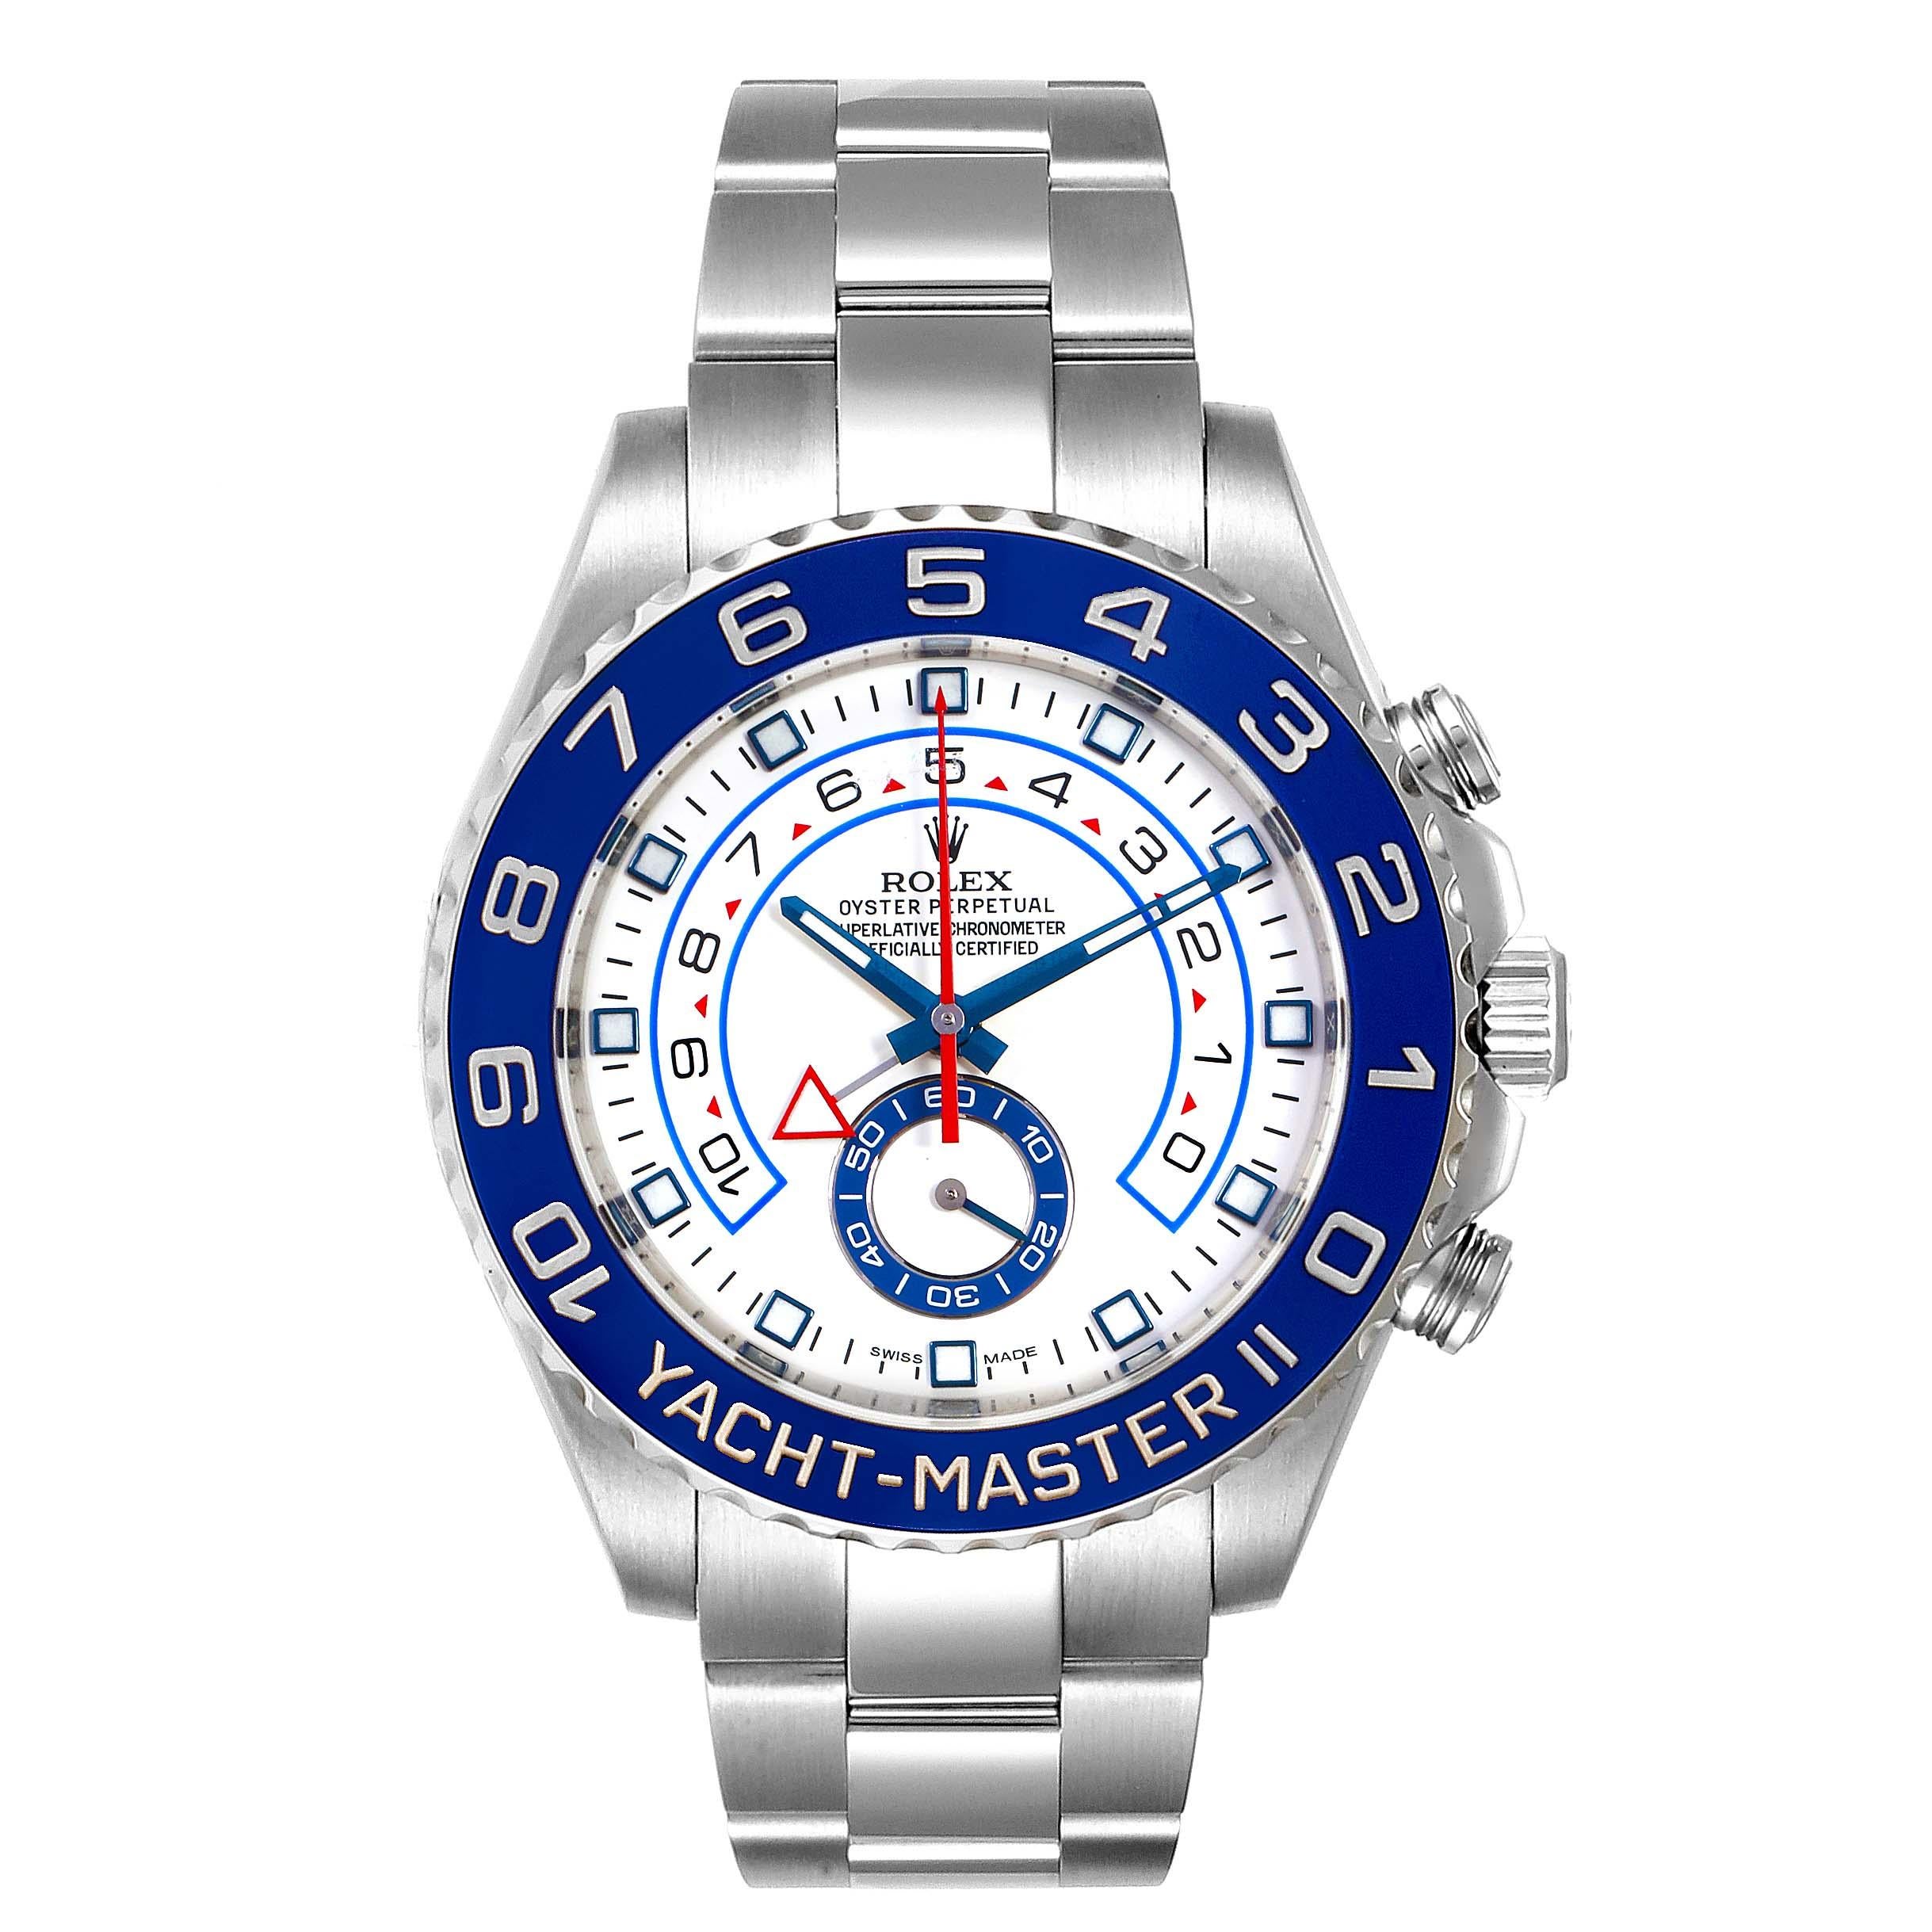 Rolex Yachtmaster II 44 Blue Cerachrom Bezel Mens Watch 116680 Box Card. Officially certified chronometer self-winding movement. Stainless steel case 44.0 mm in diameter. Screw down crown and caseback. Rolex logo on a crown. 90 degree rotating blue